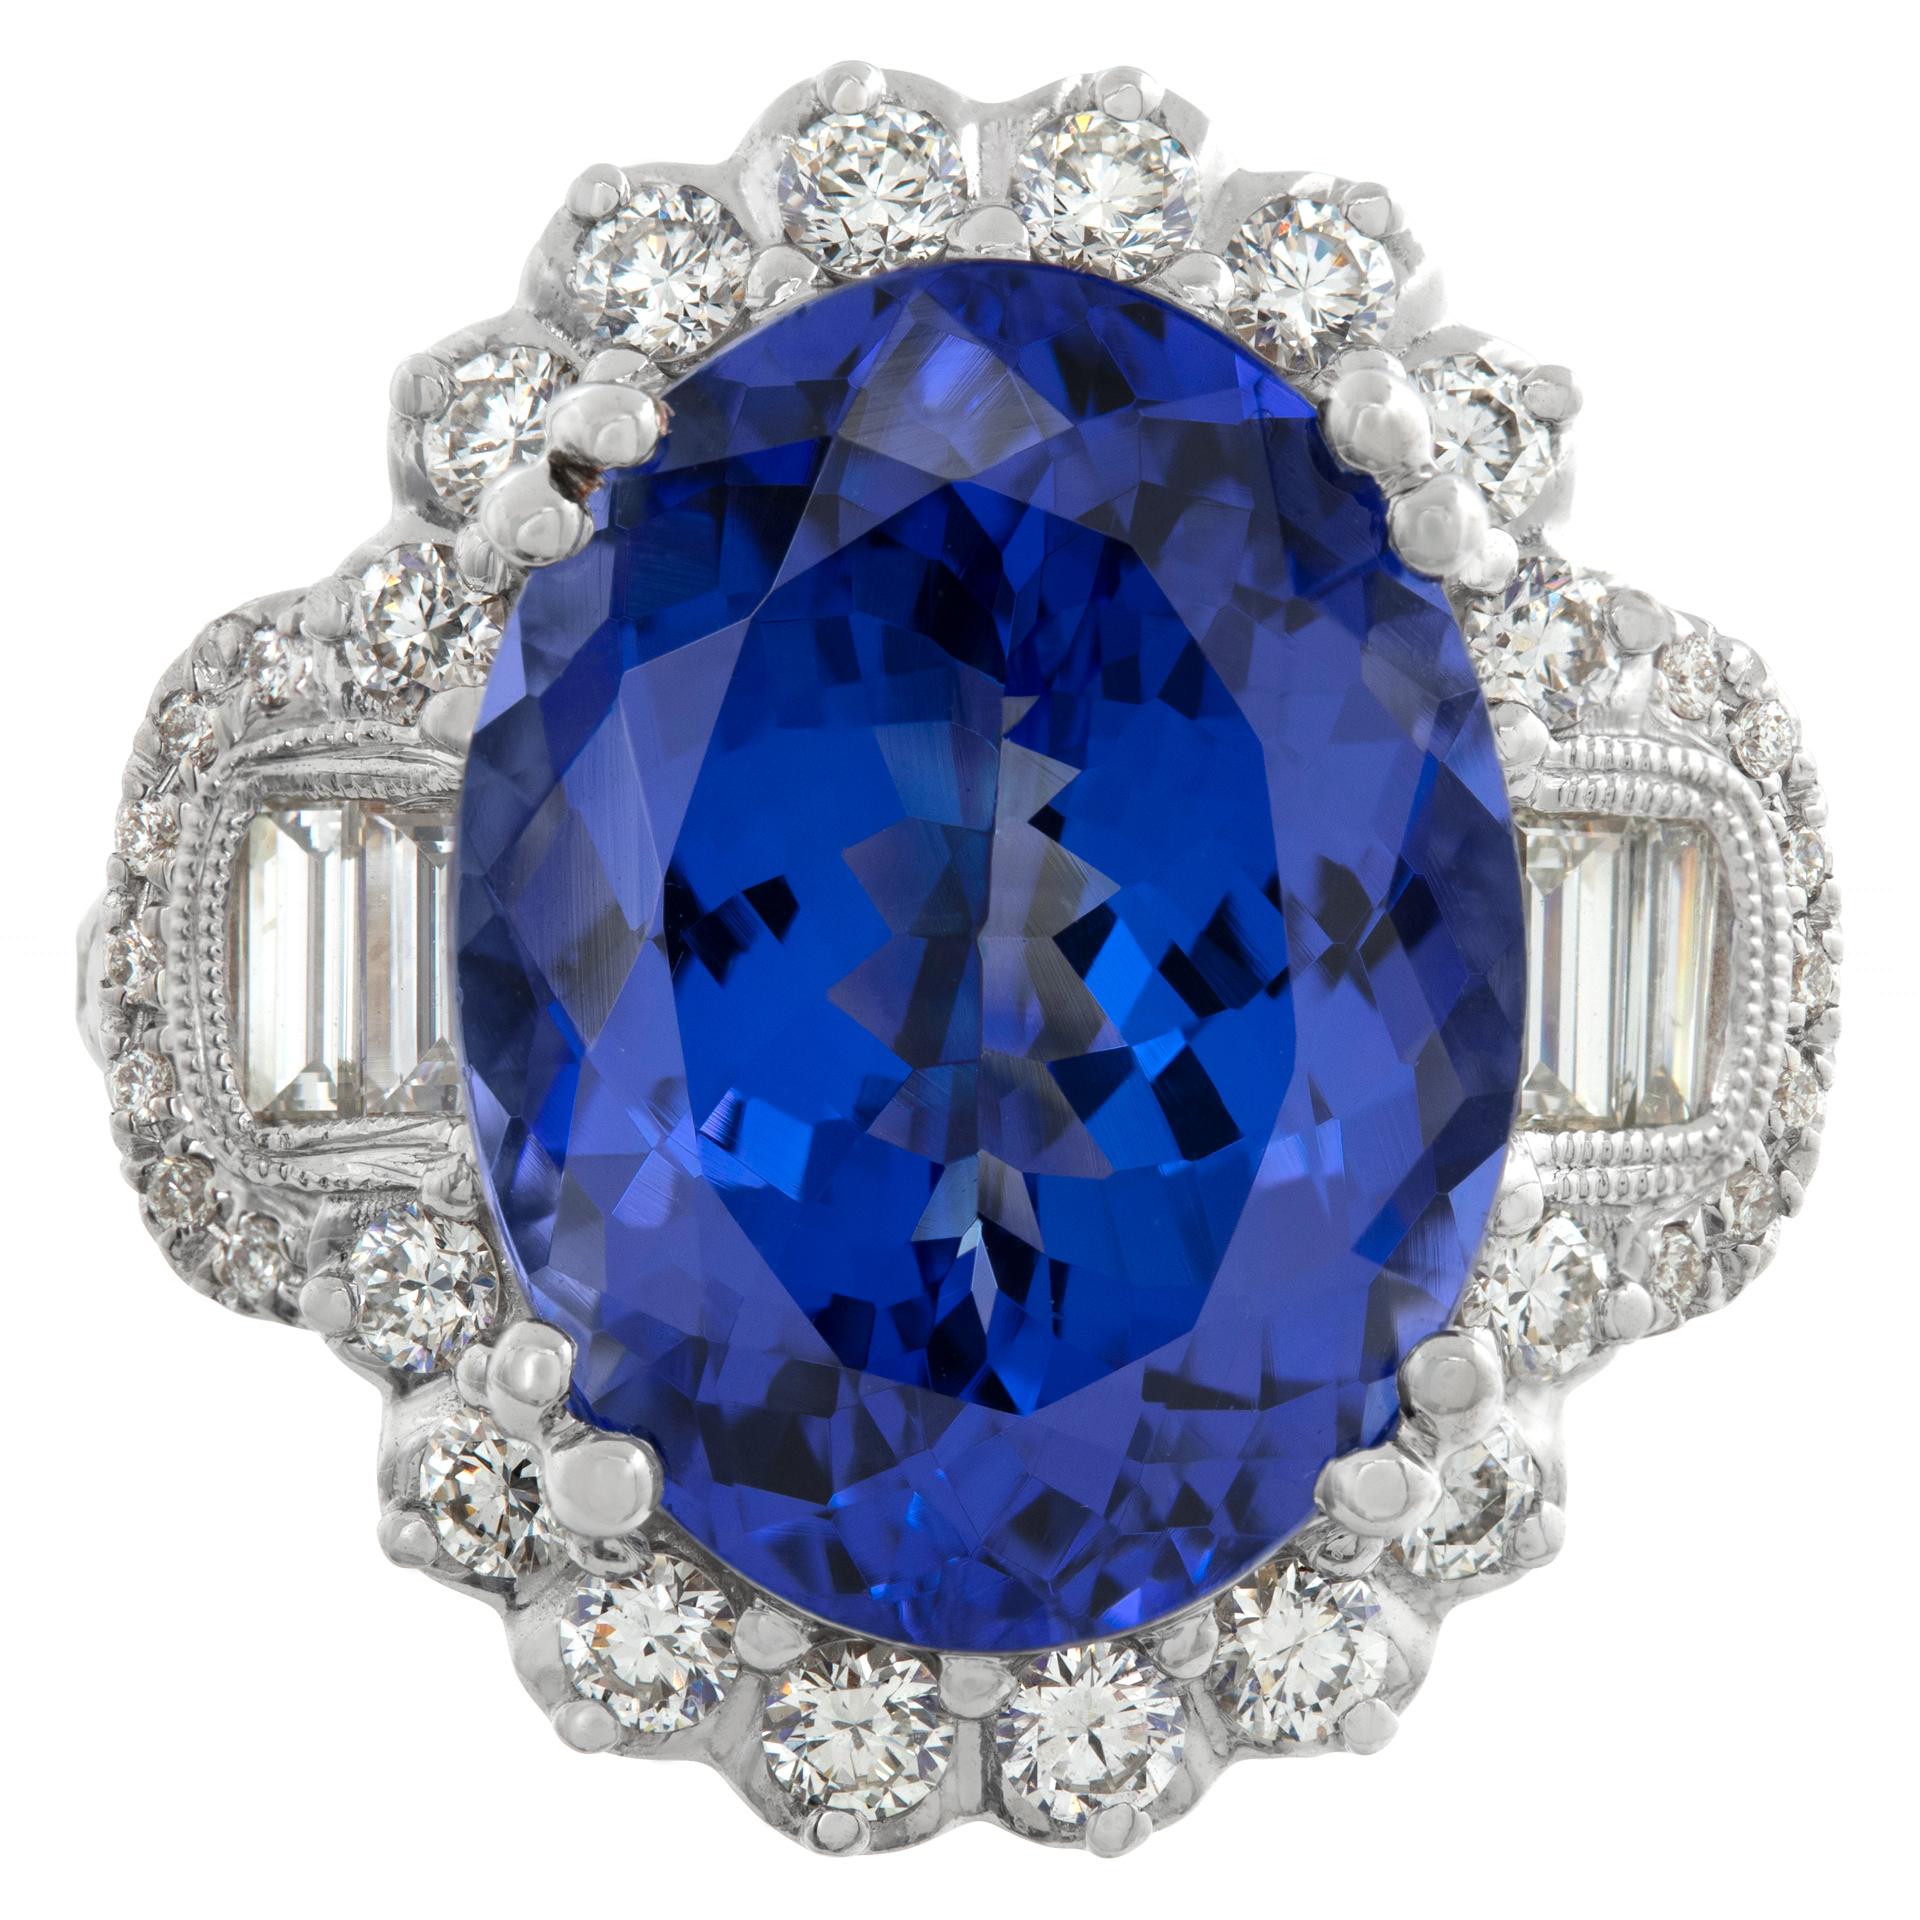 AGL Certified tanzanite and diamond ring in 18k white gold with yellow gold accents. Approximately 1.24 carats in diamonds (H-I color, SI clarity) and 11.05 carat oval tanzanite. Ring size 7.This tanzanite/diamond ring is currently size 7 and some